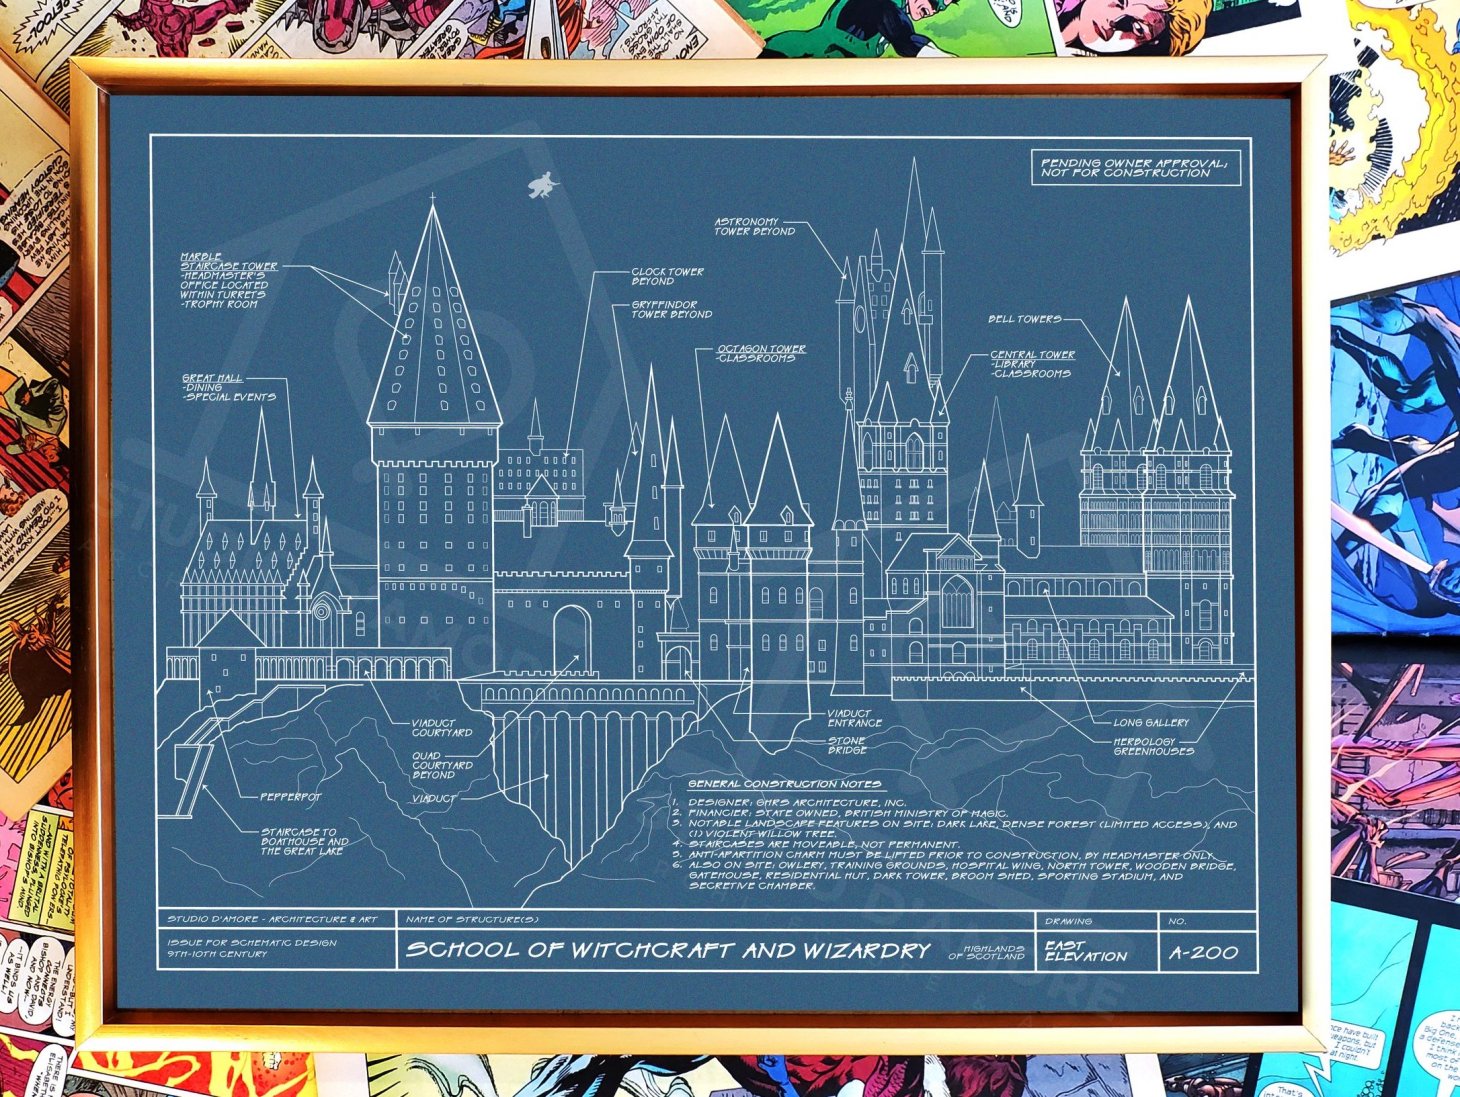 Harry-potter inspired blueprint art from studio d'amore, best gifts for teen boys